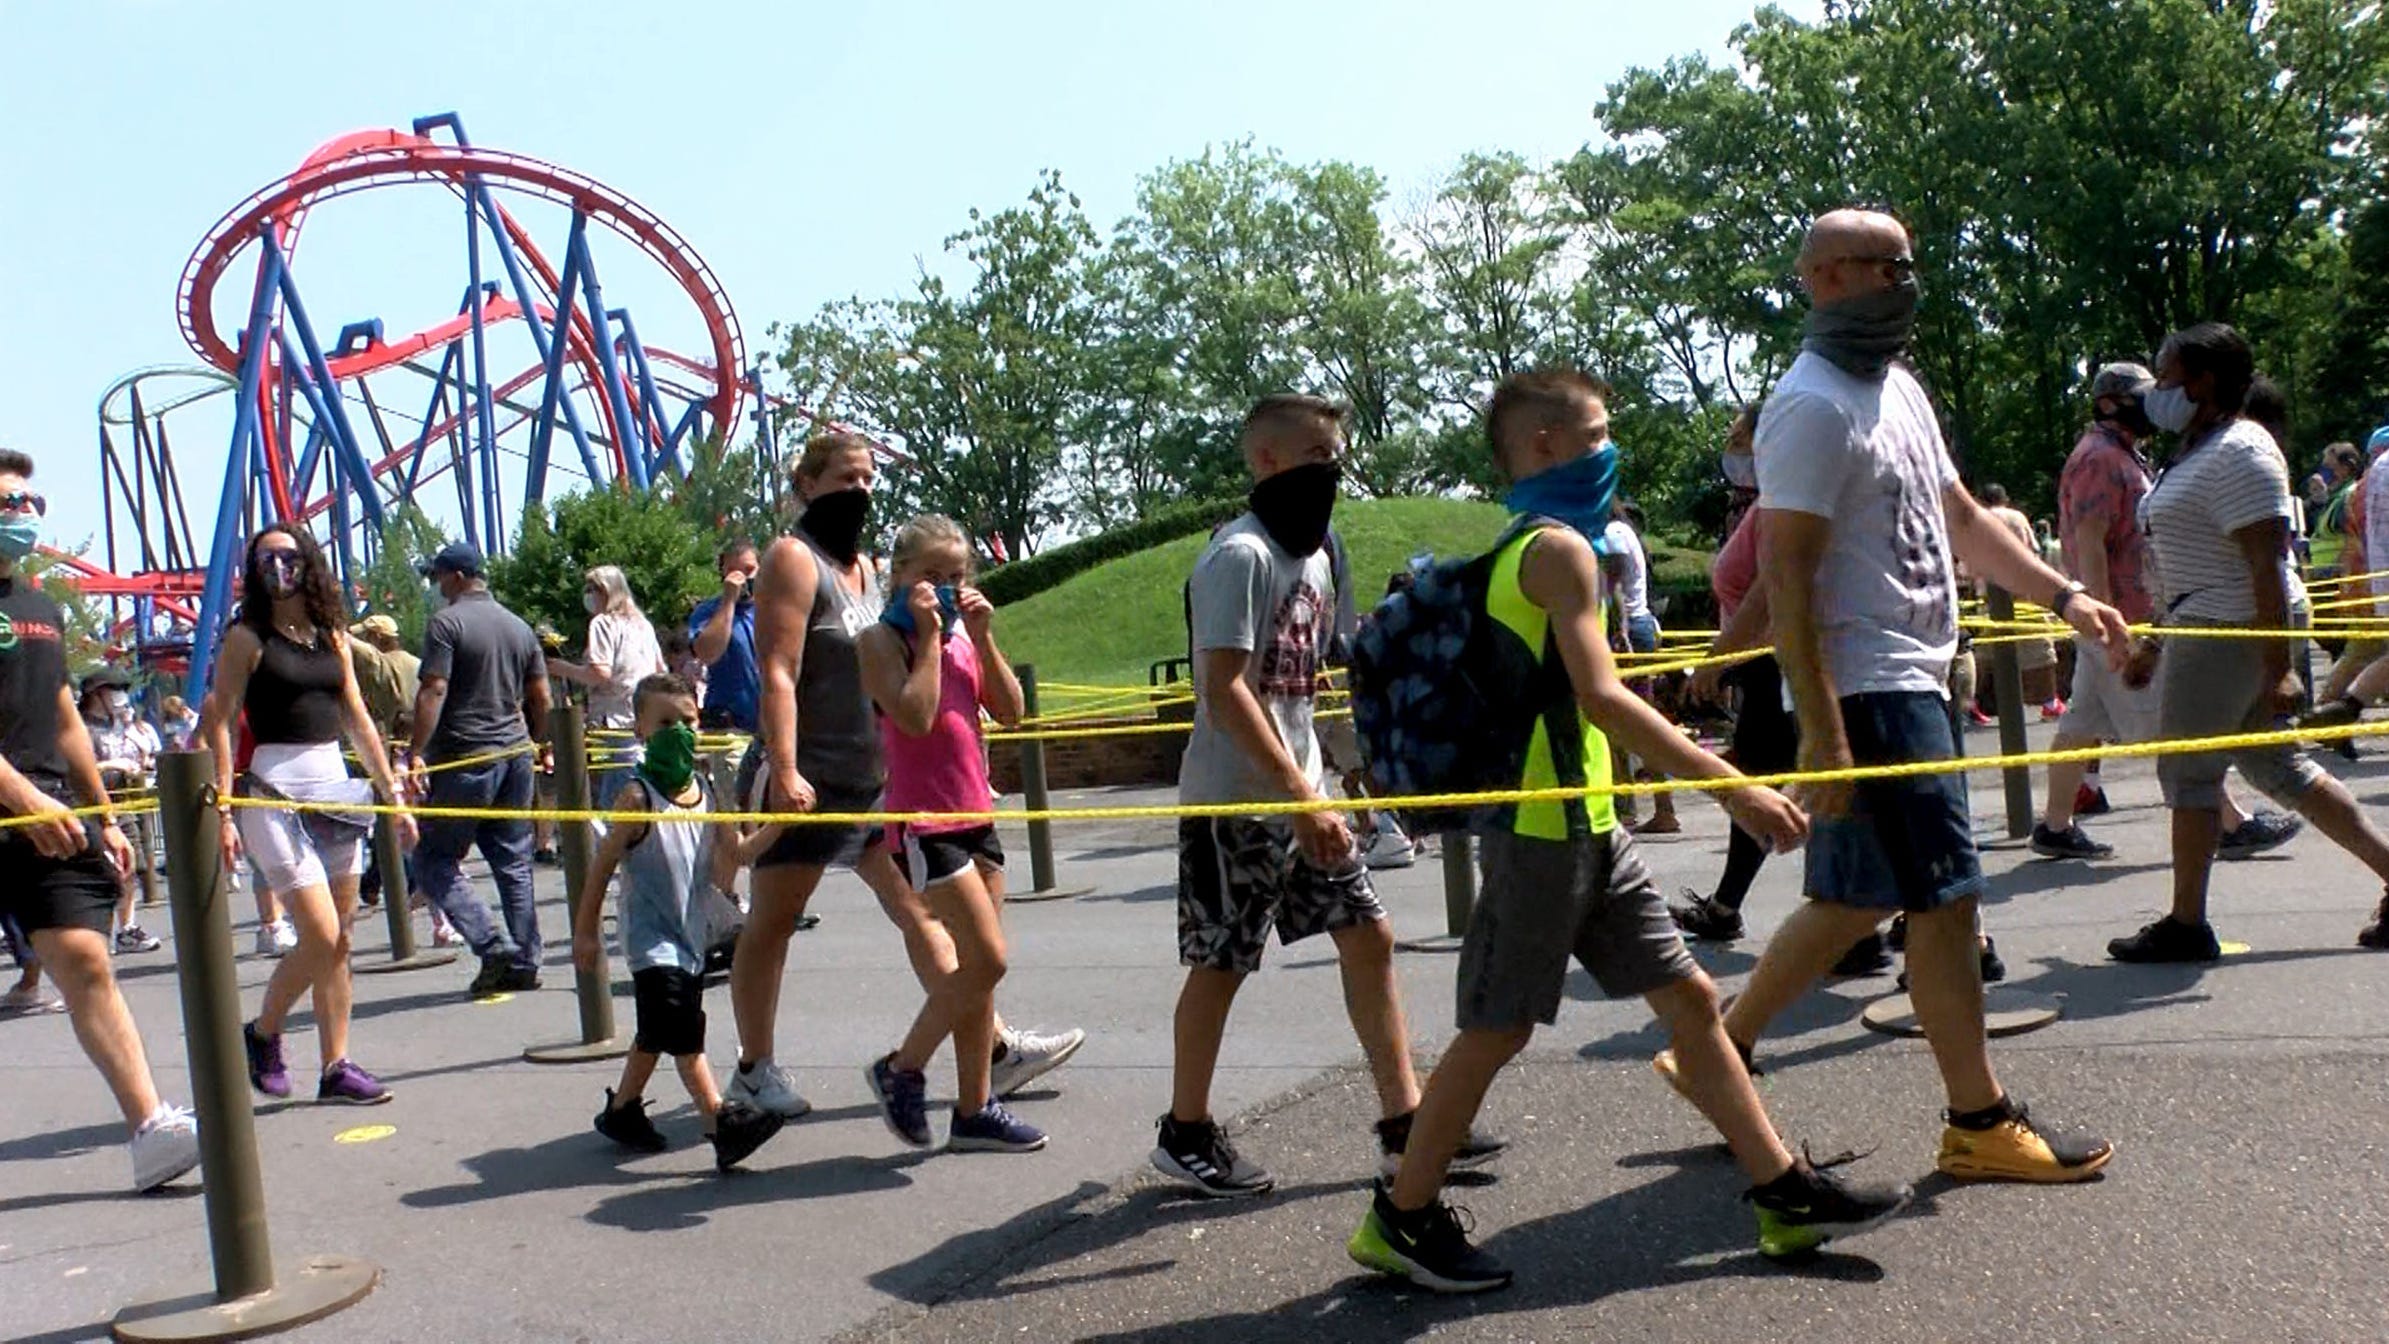 Crowds flock to Six Flags Great Adventure for opening day